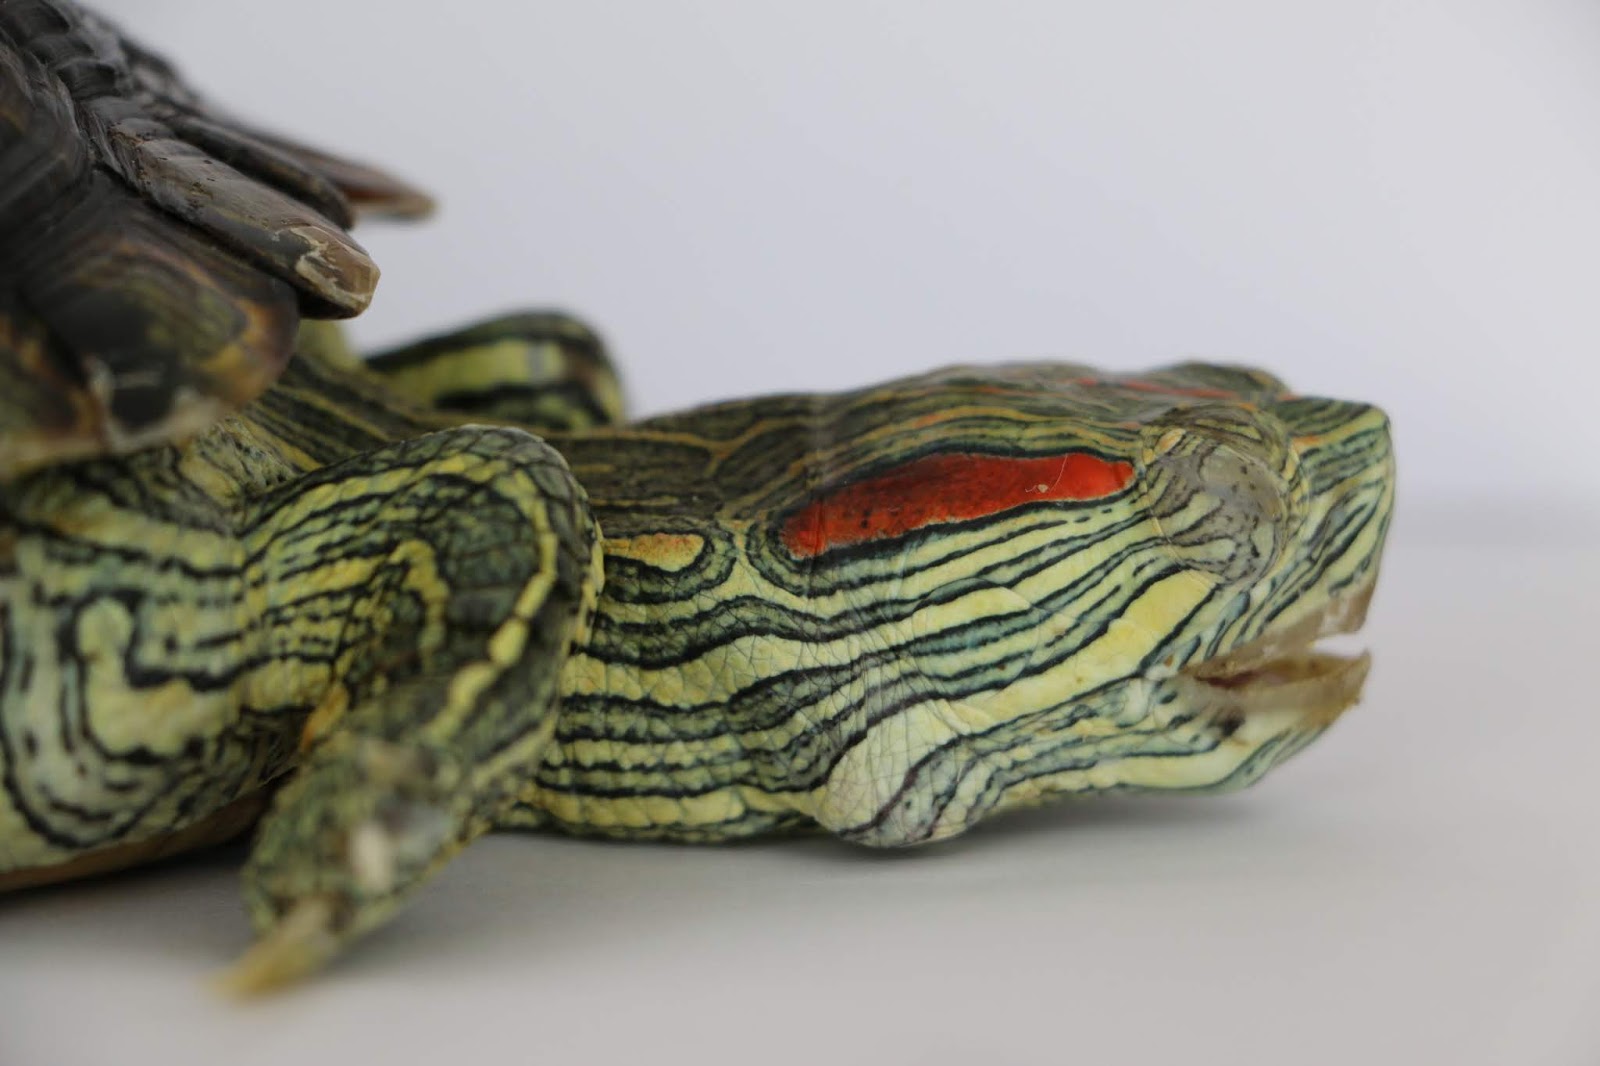 The red-eared slider has a paralysed neck.